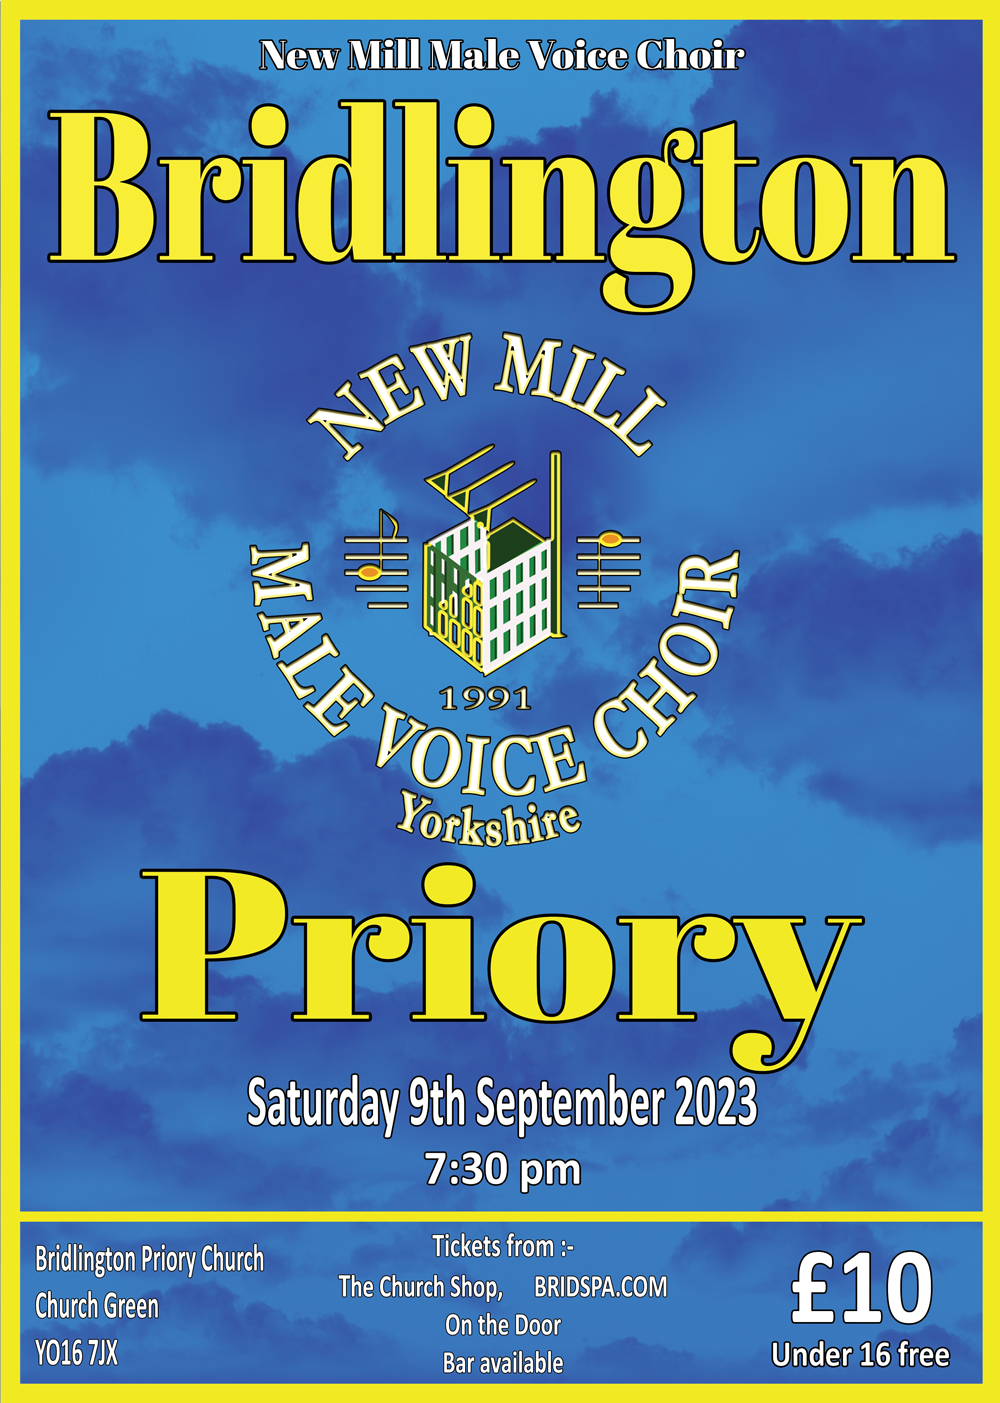 Poster for the New Mill Male Voice Choir concert at Bridlington Priory, September 2023